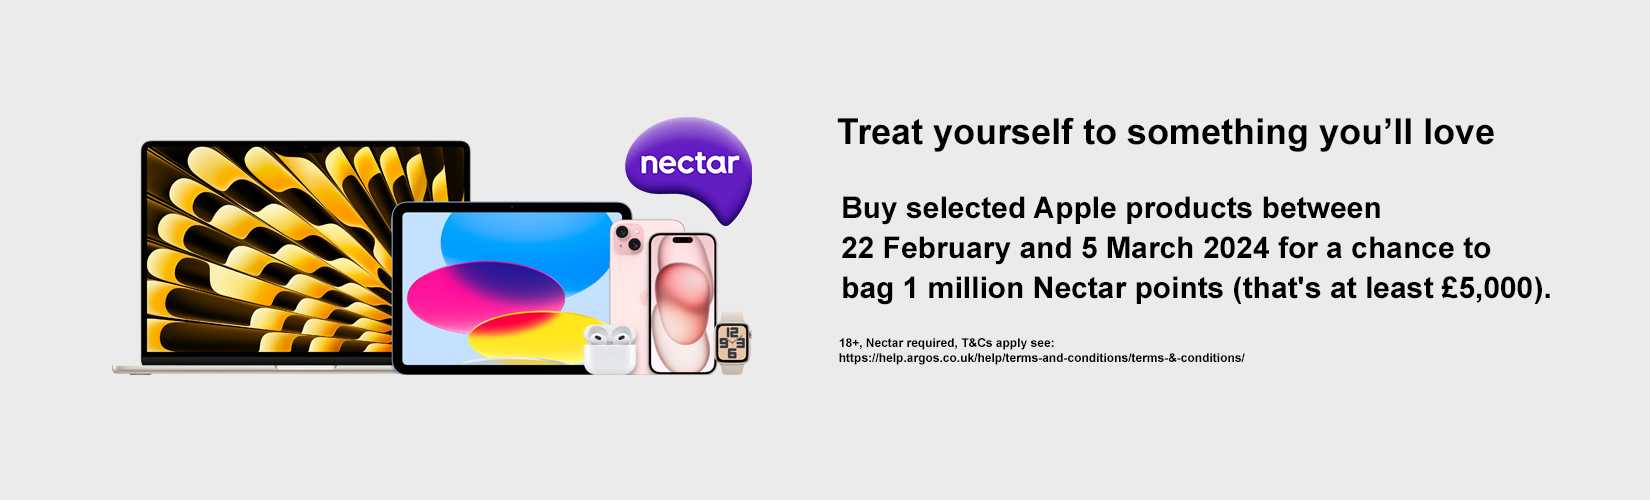 Treat yourself something you'll love. Buy selected Apple products between 22 February and 5 march 2024 for a chance to bag 1 million Nectar points.